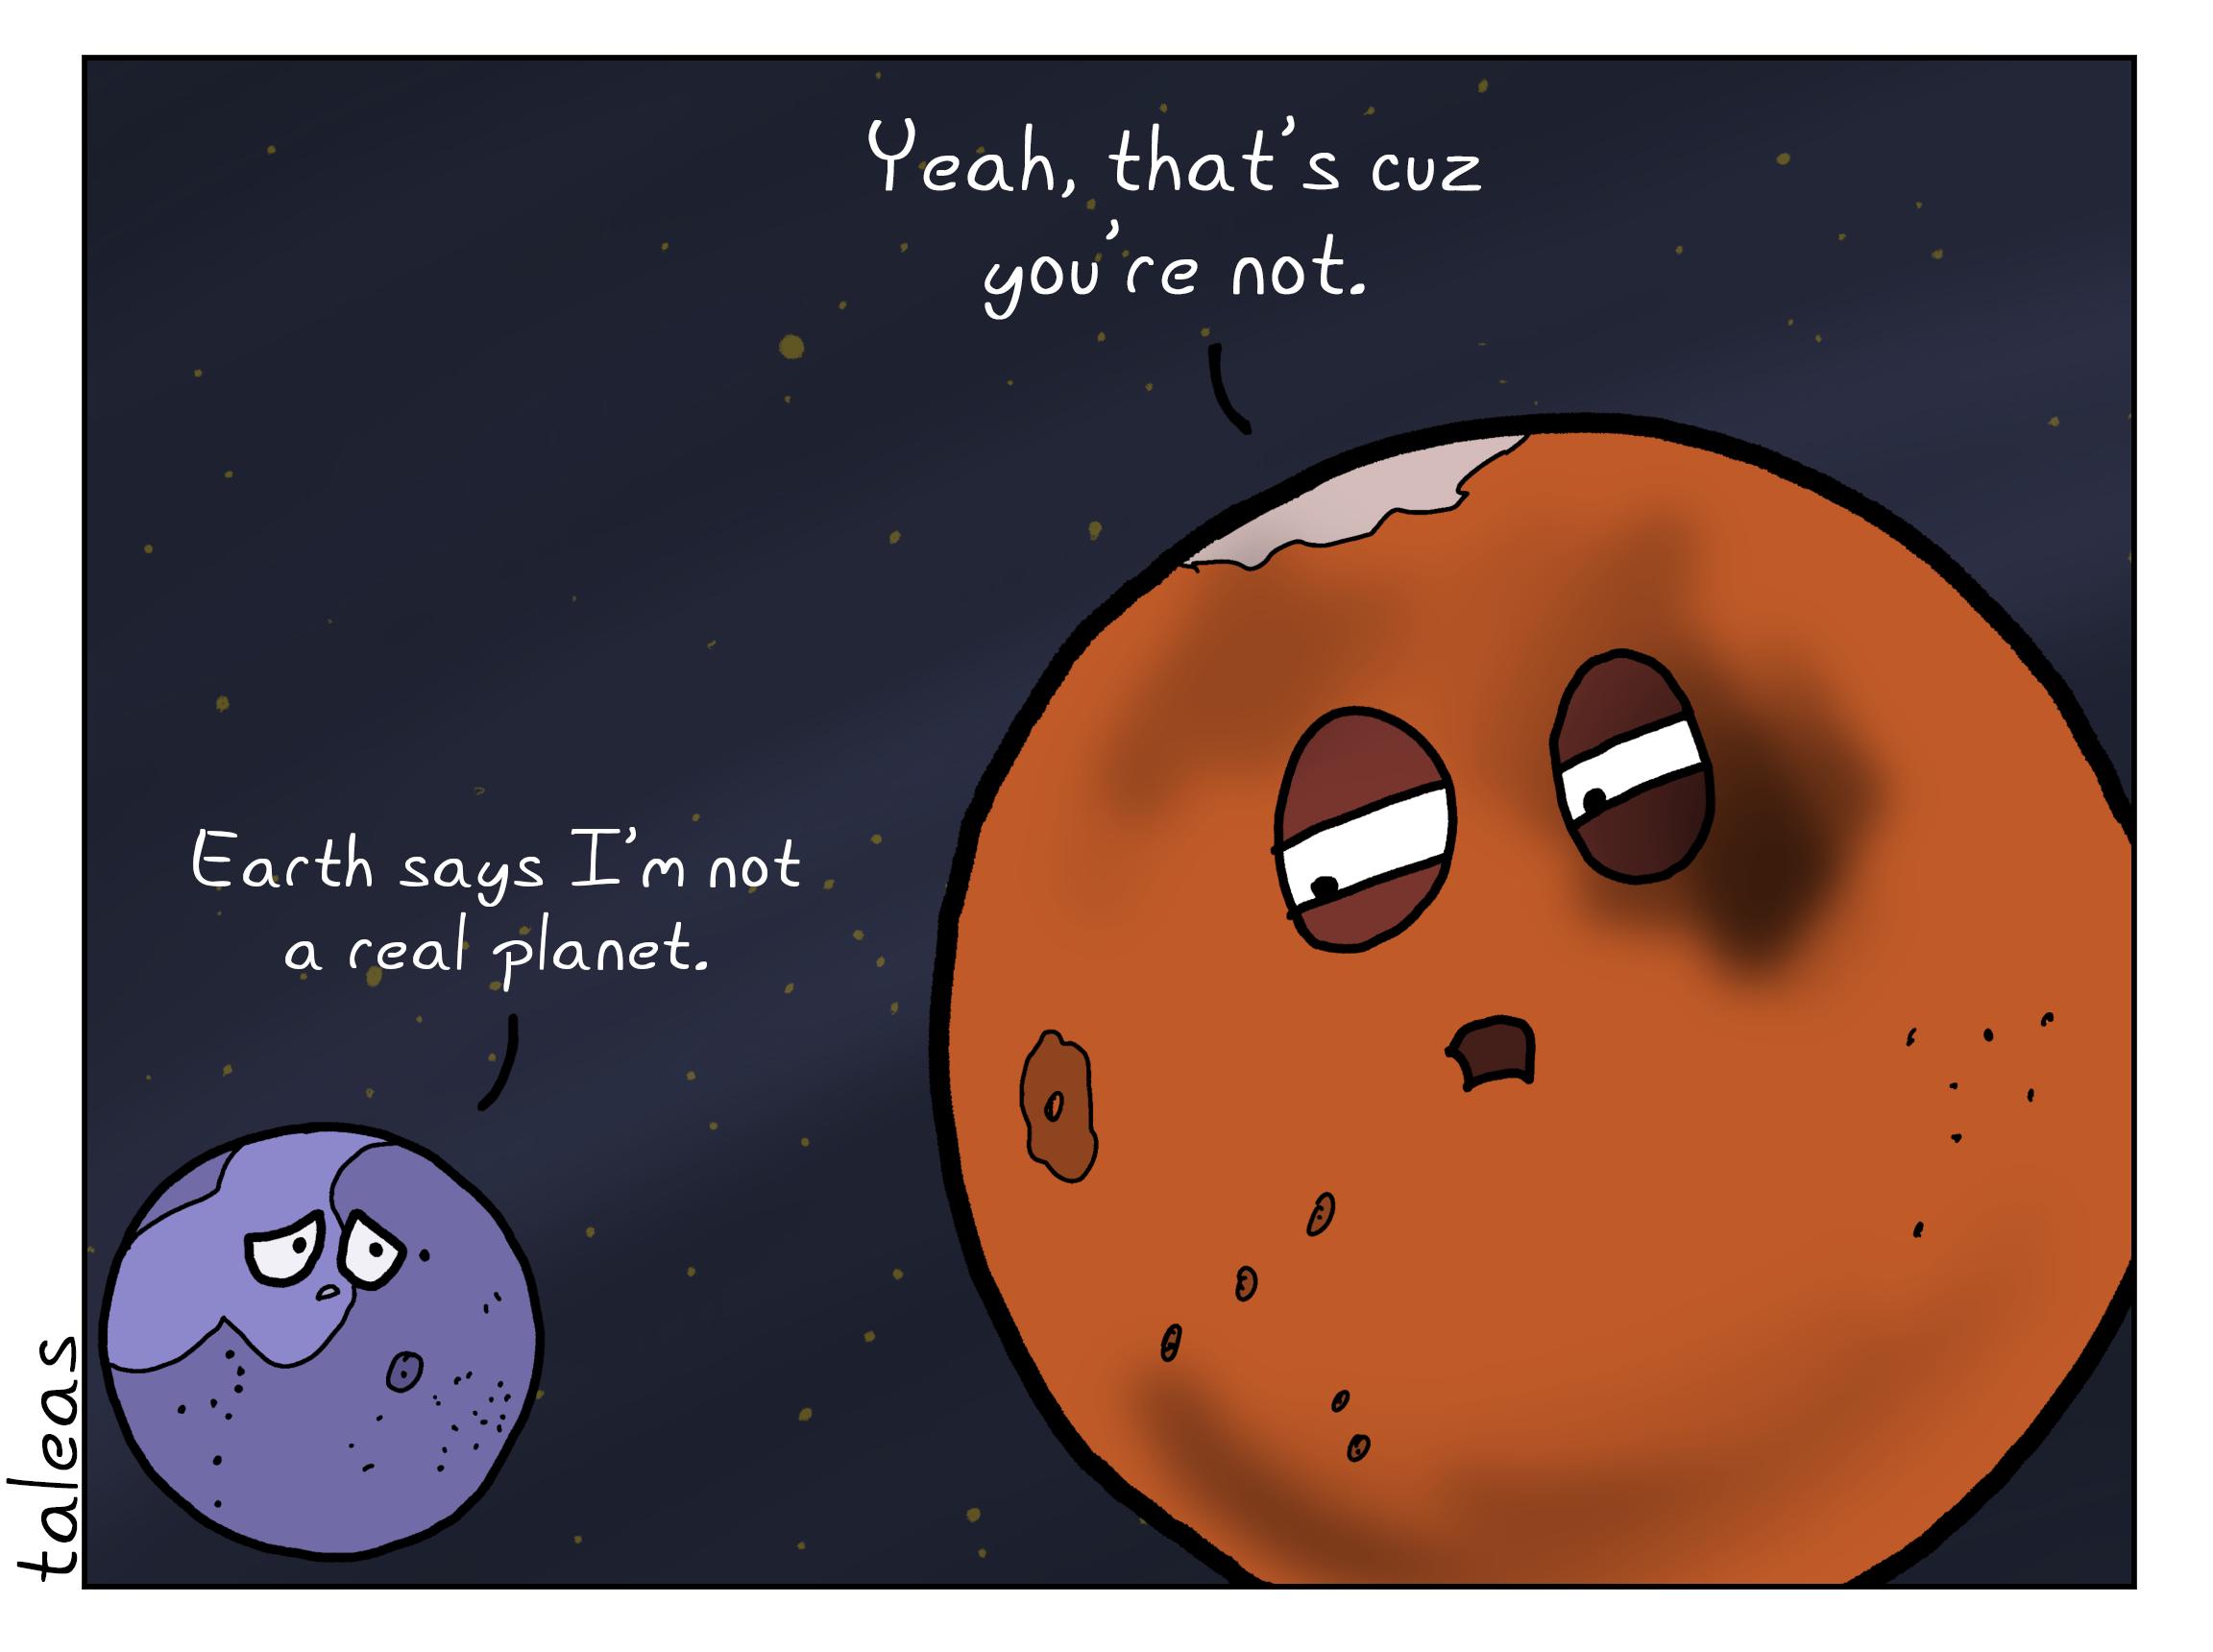 A despondent Pluto laments to a gruff Mars, "Earth says I'm not a real planet." Mars responds, "Yeah, that's cuz you're not."